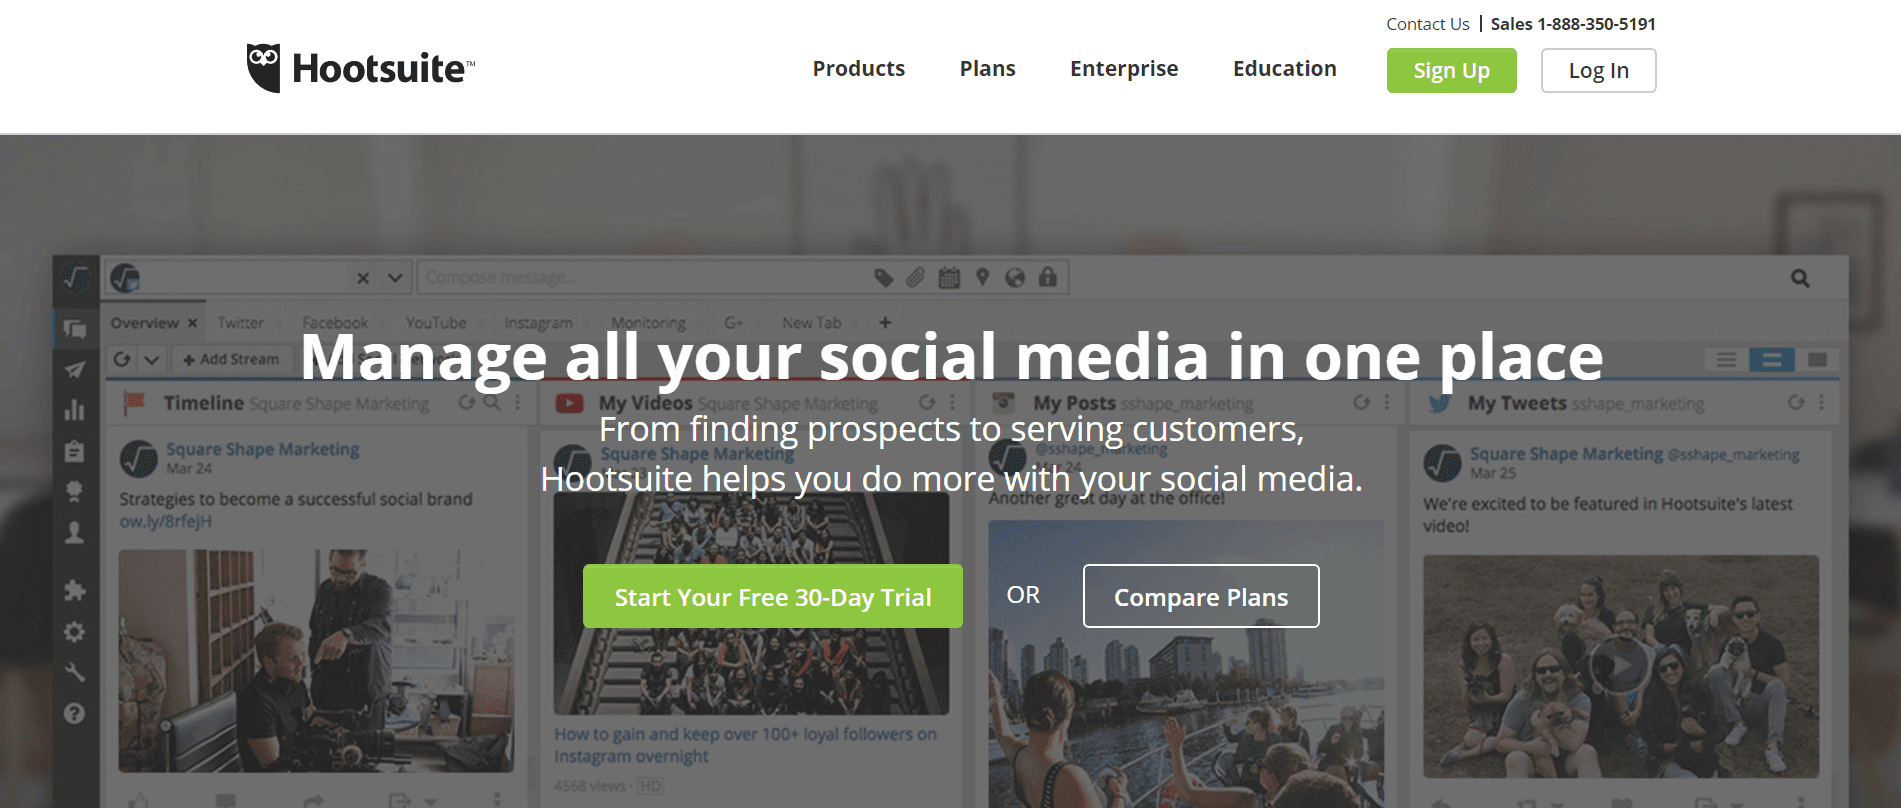 The Hootsuite home page.